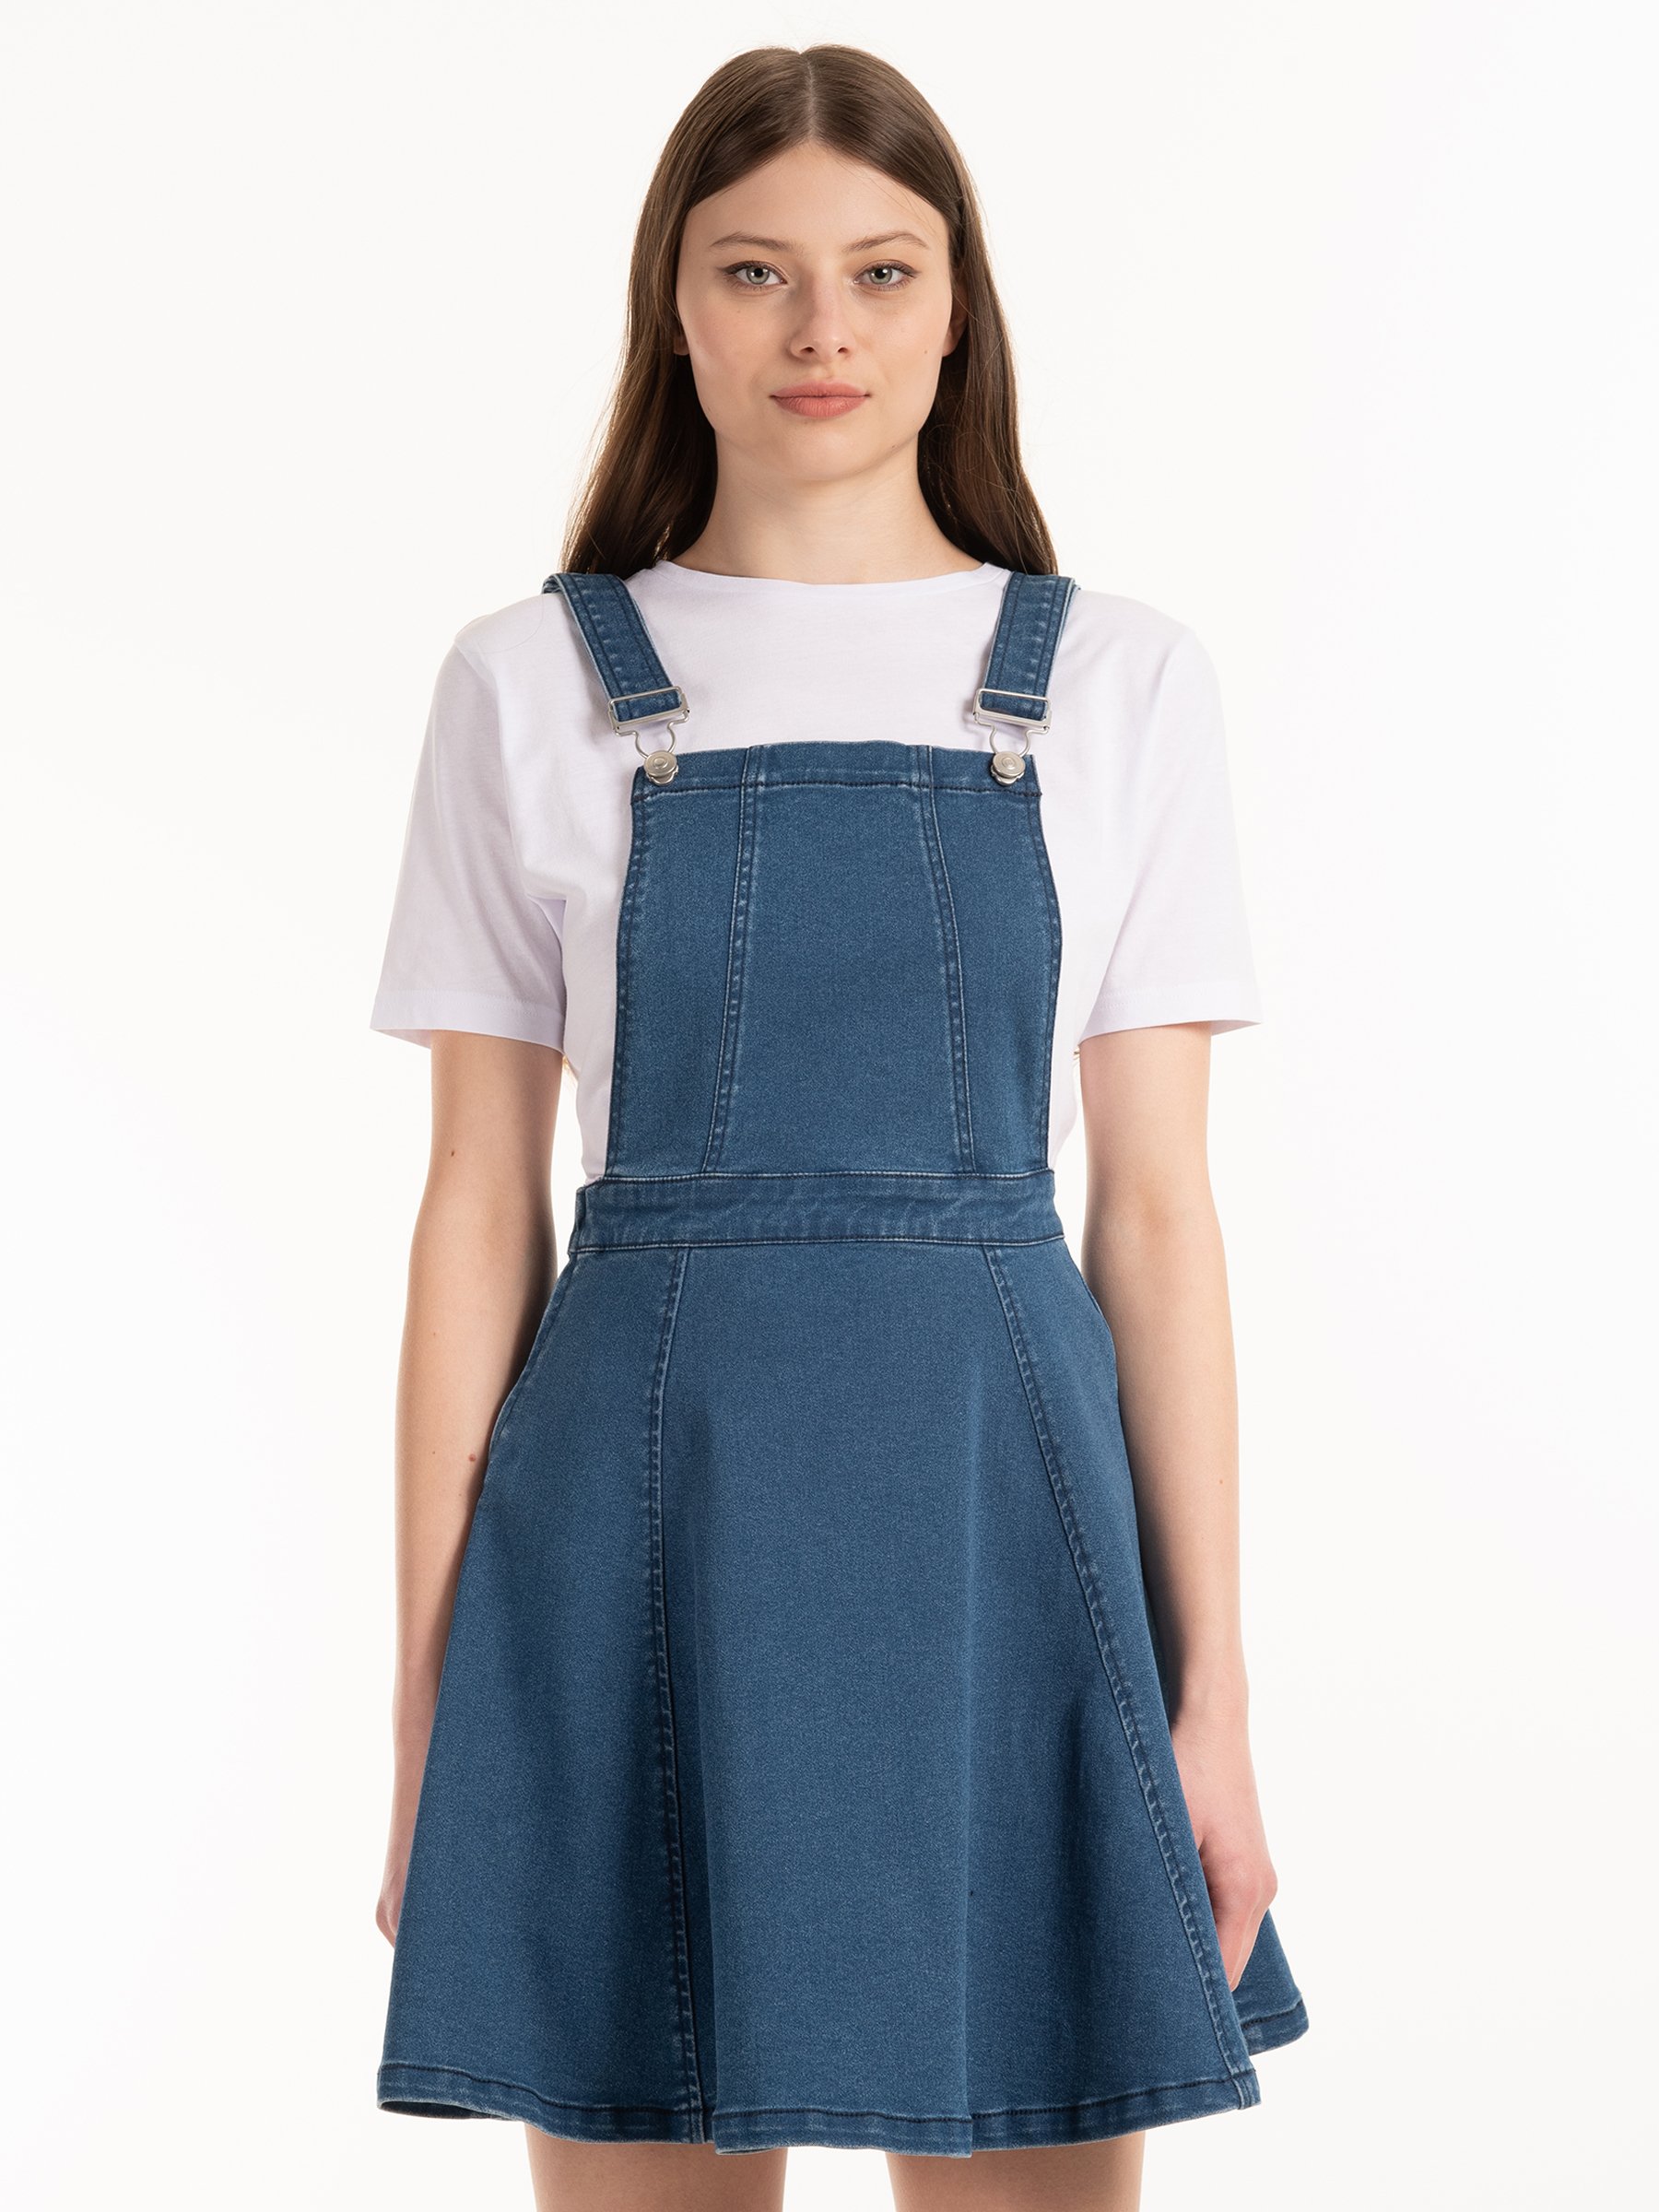 Dungarees Skirts  Buy Dungarees Skirts online in India